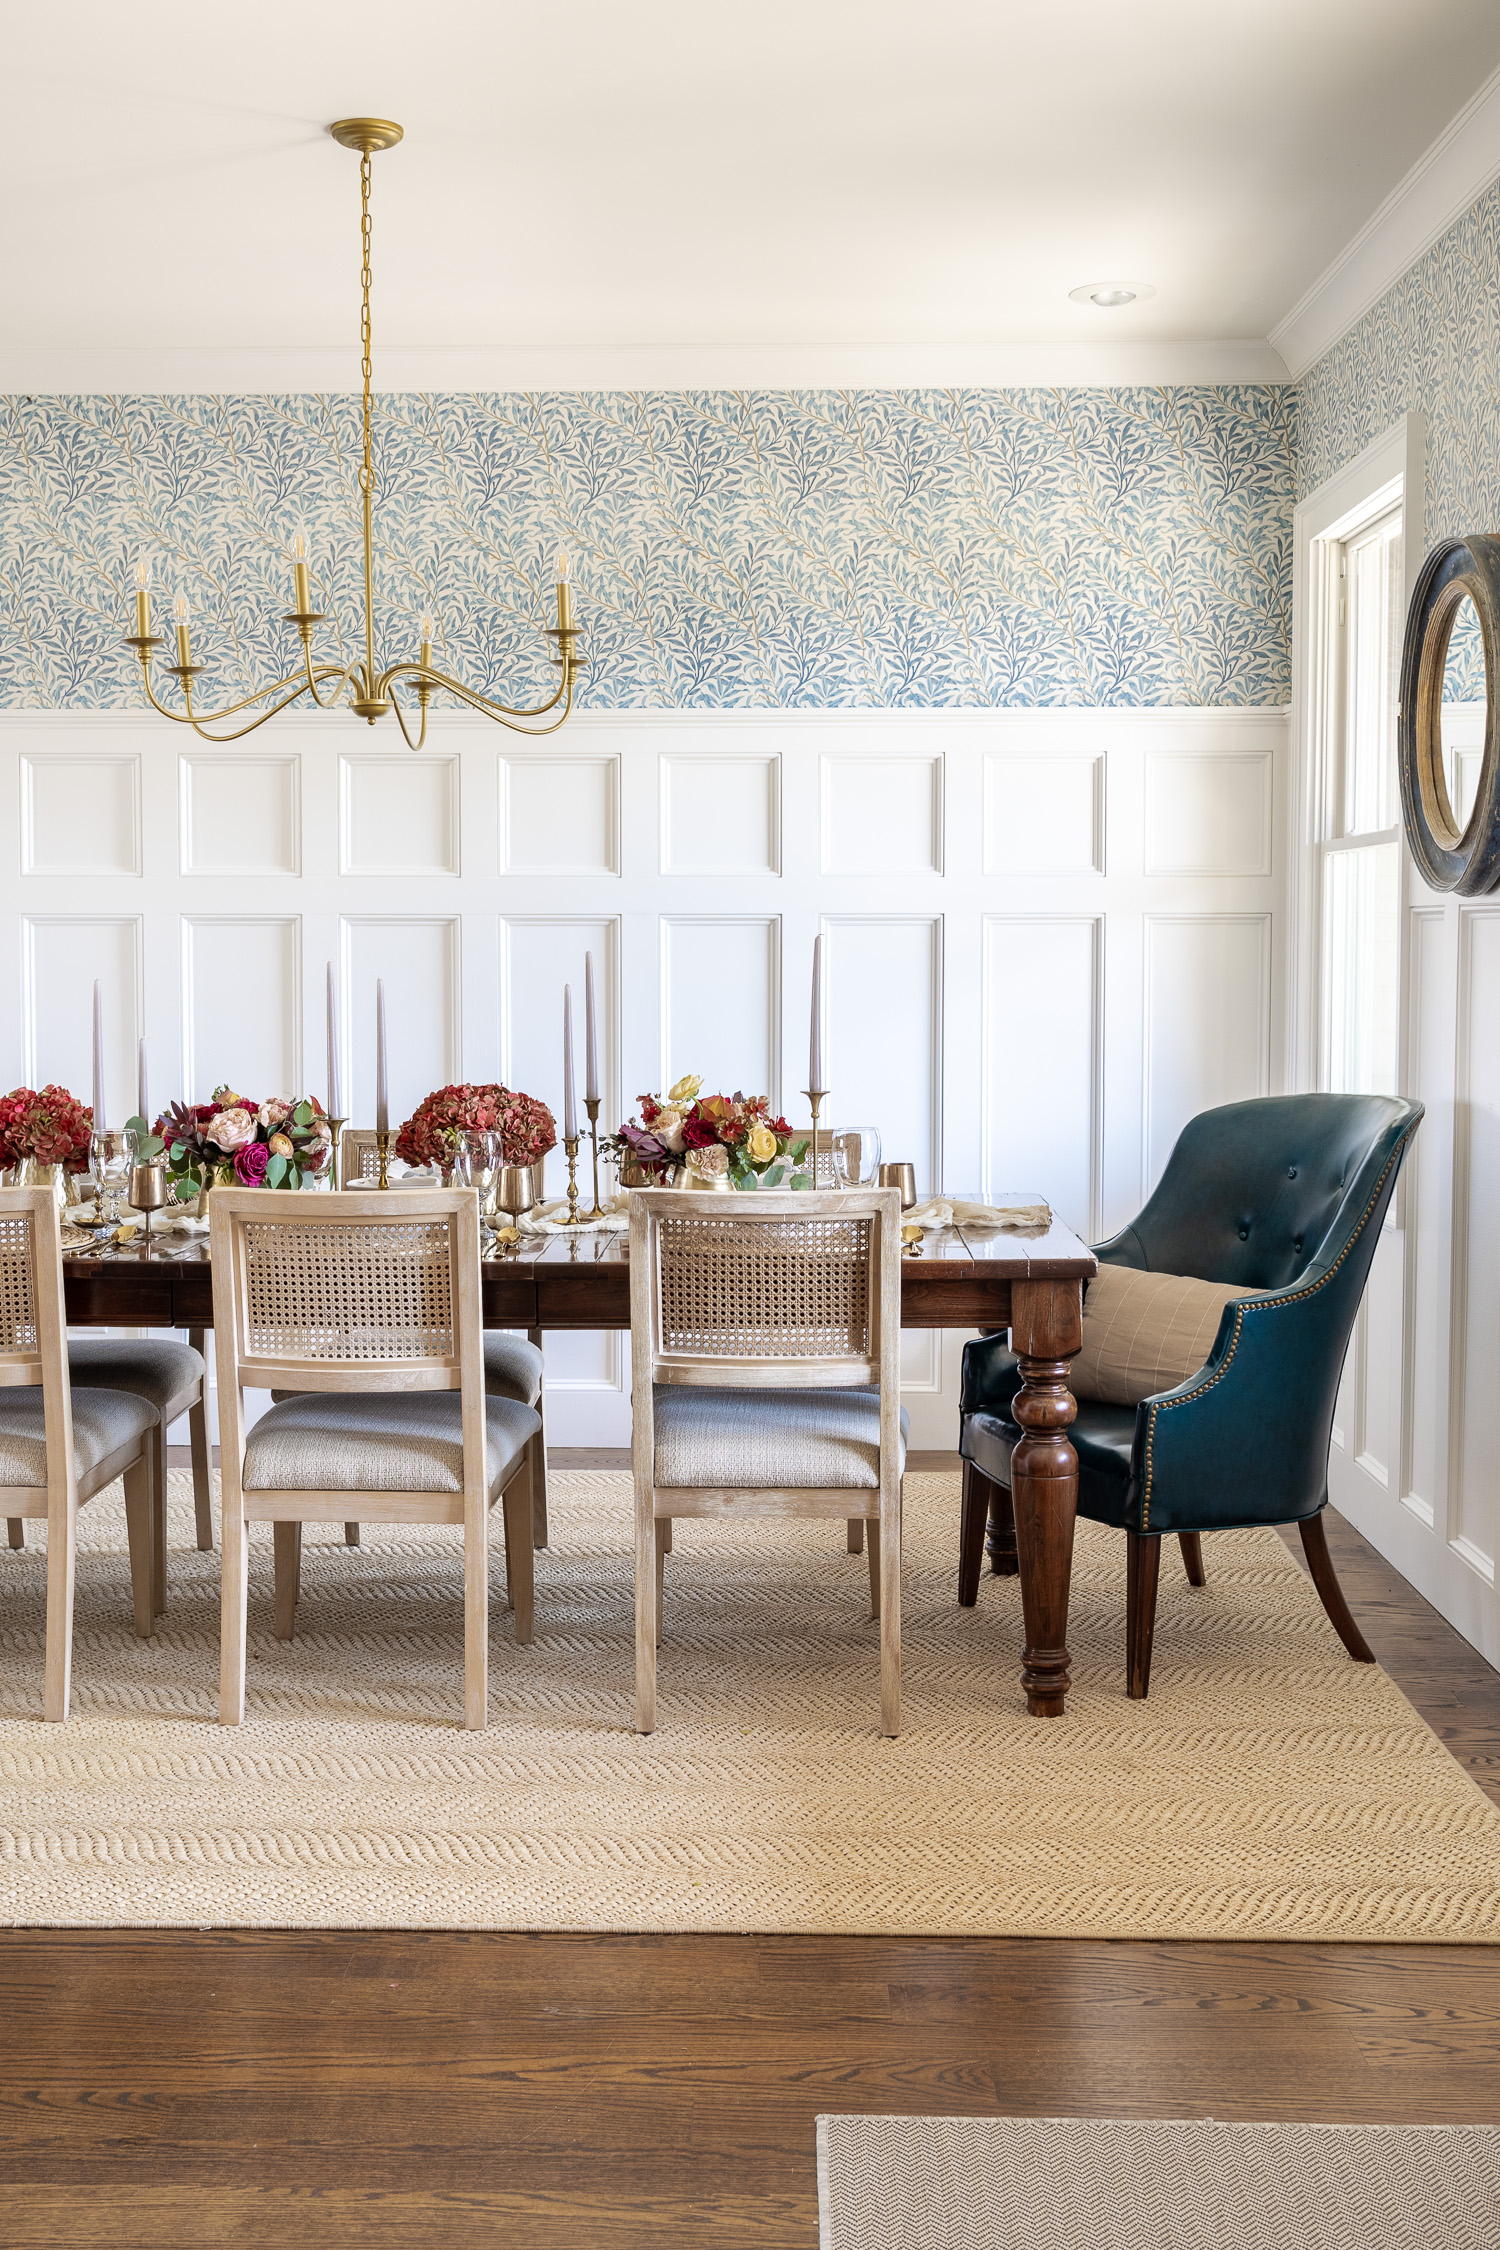 Dining room table with Thanksgiving table setting